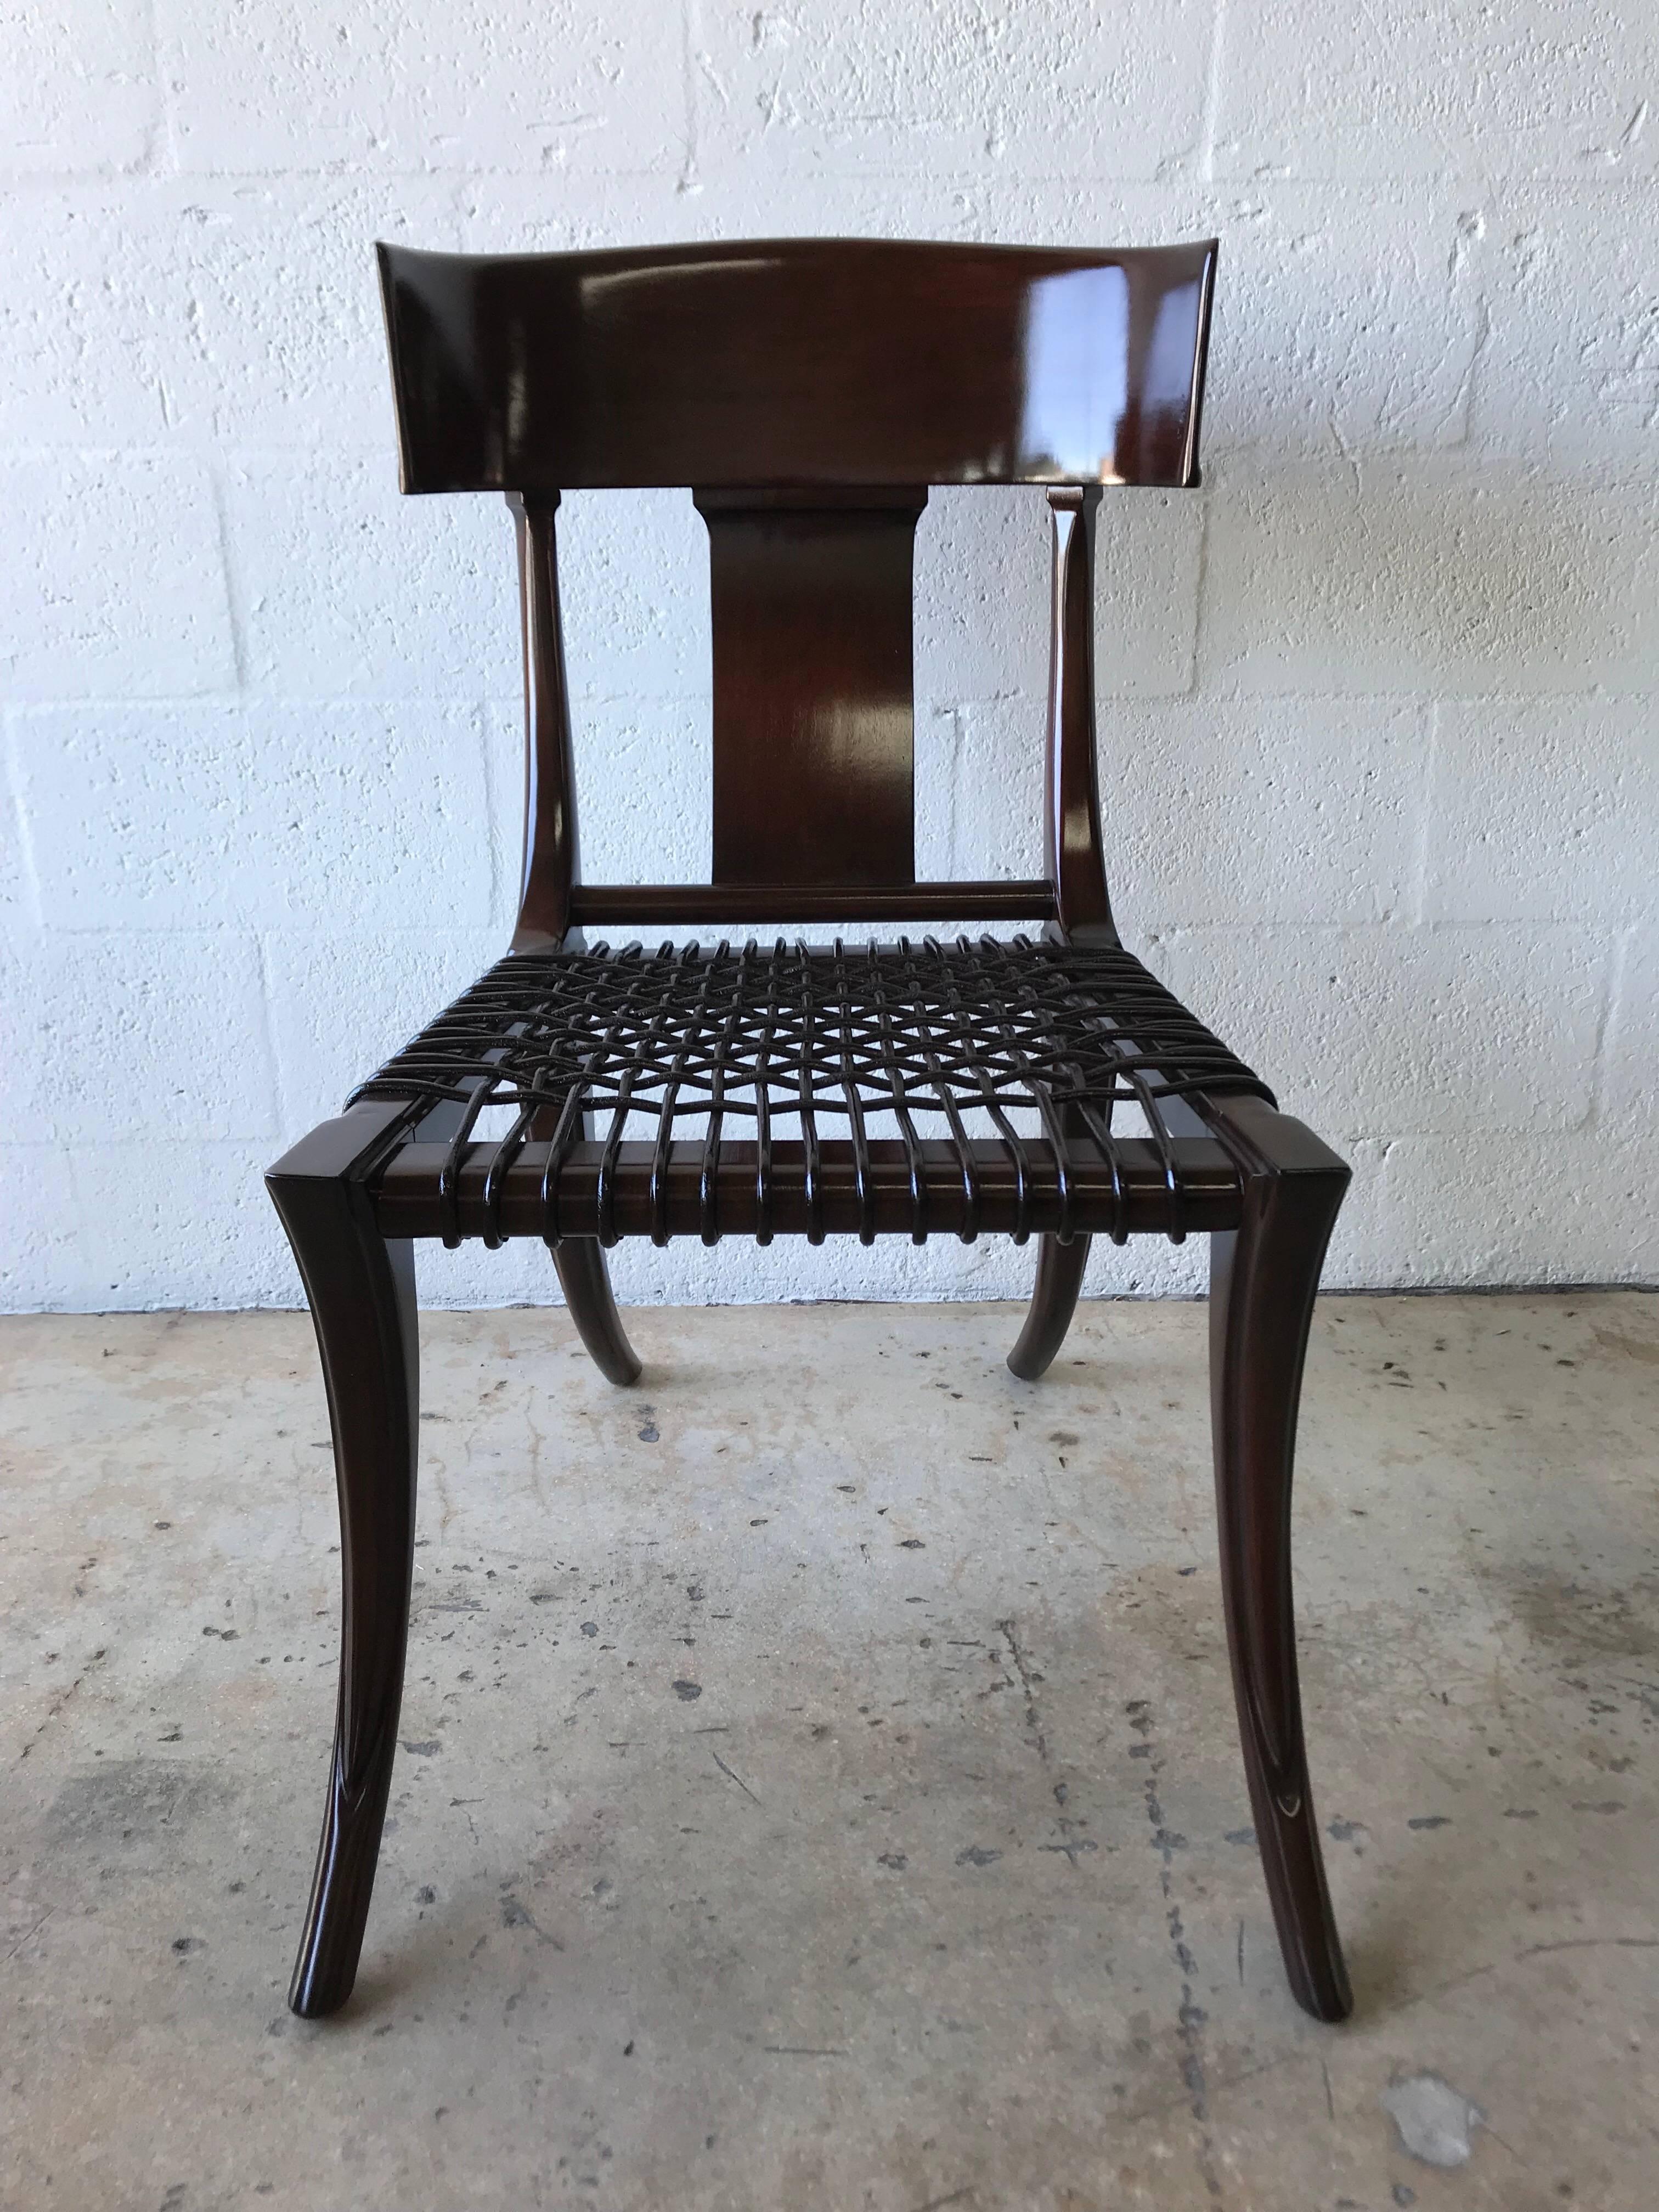 Rare Klismos chair with splayed saber legs and leather woven seat designed by T.H. Robsjohn-Gibbings for Saridis Greece.

Measures: seat height 16.75 inches.